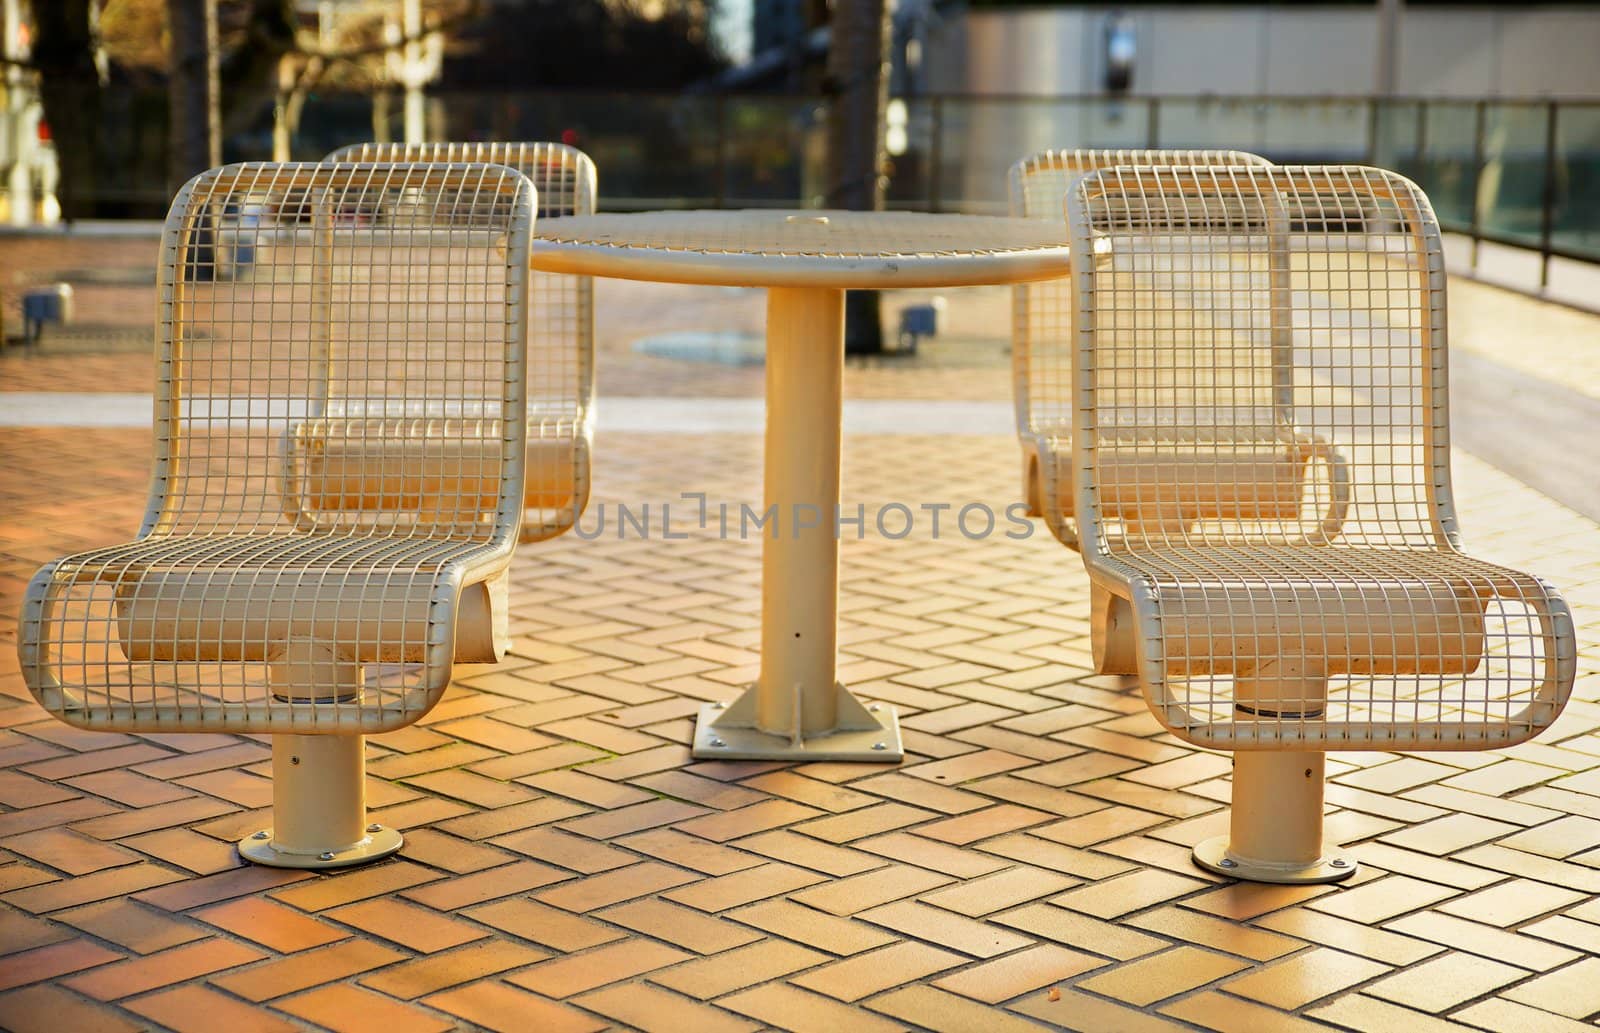 Tan color City Metal Picnic Seats all pointed toward viewer